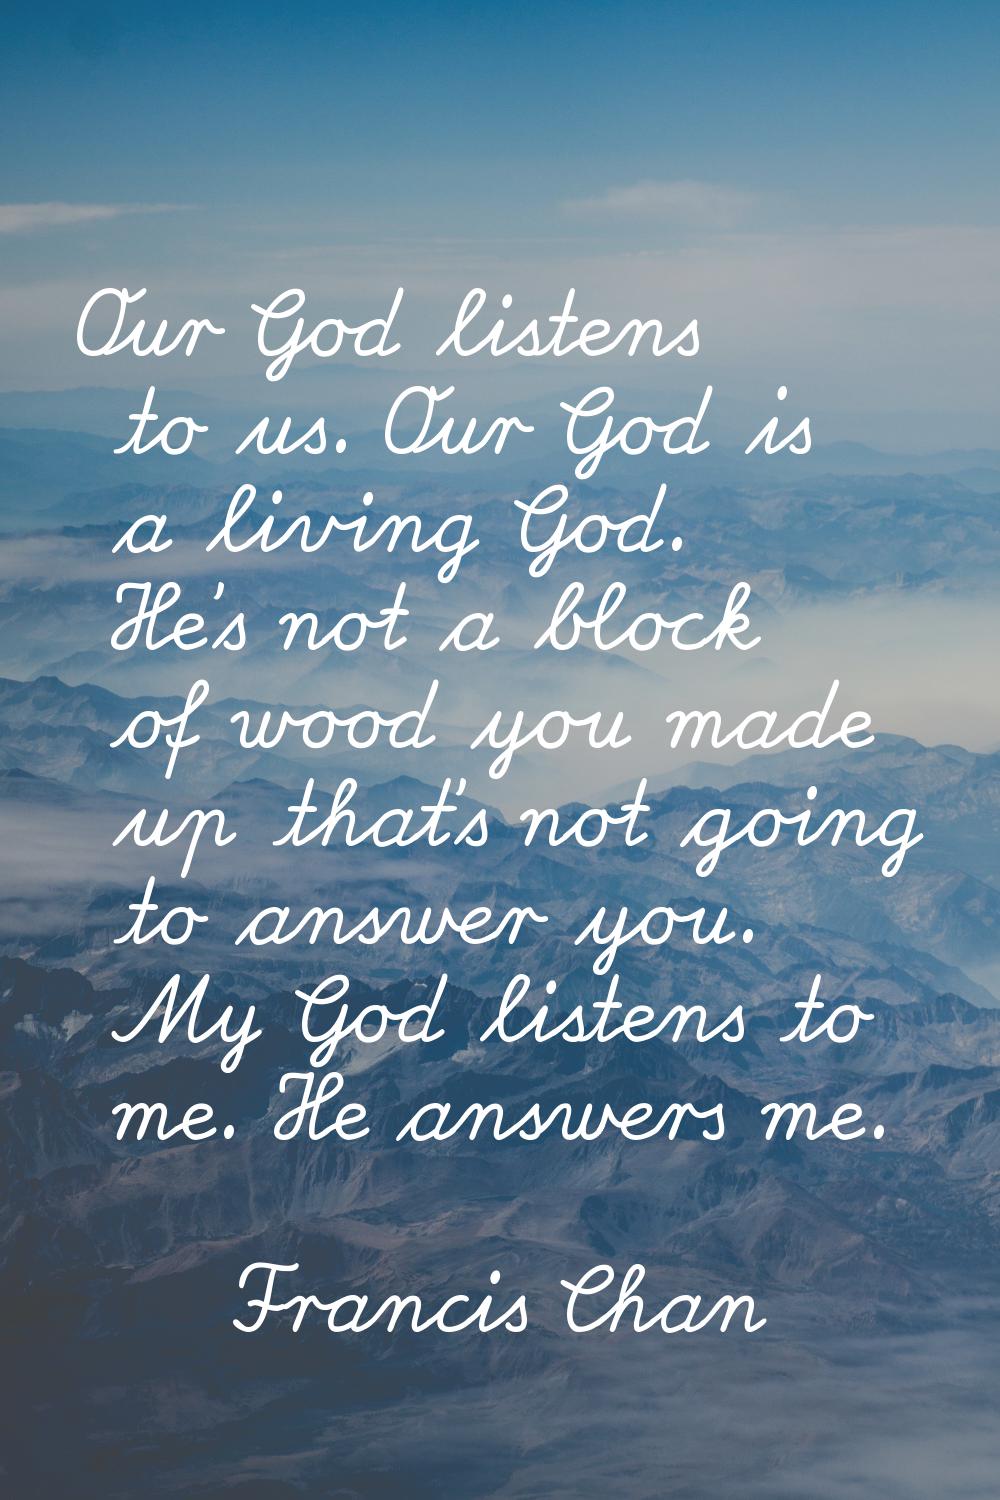 Our God listens to us. Our God is a living God. He's not a block of wood you made up that's not goi